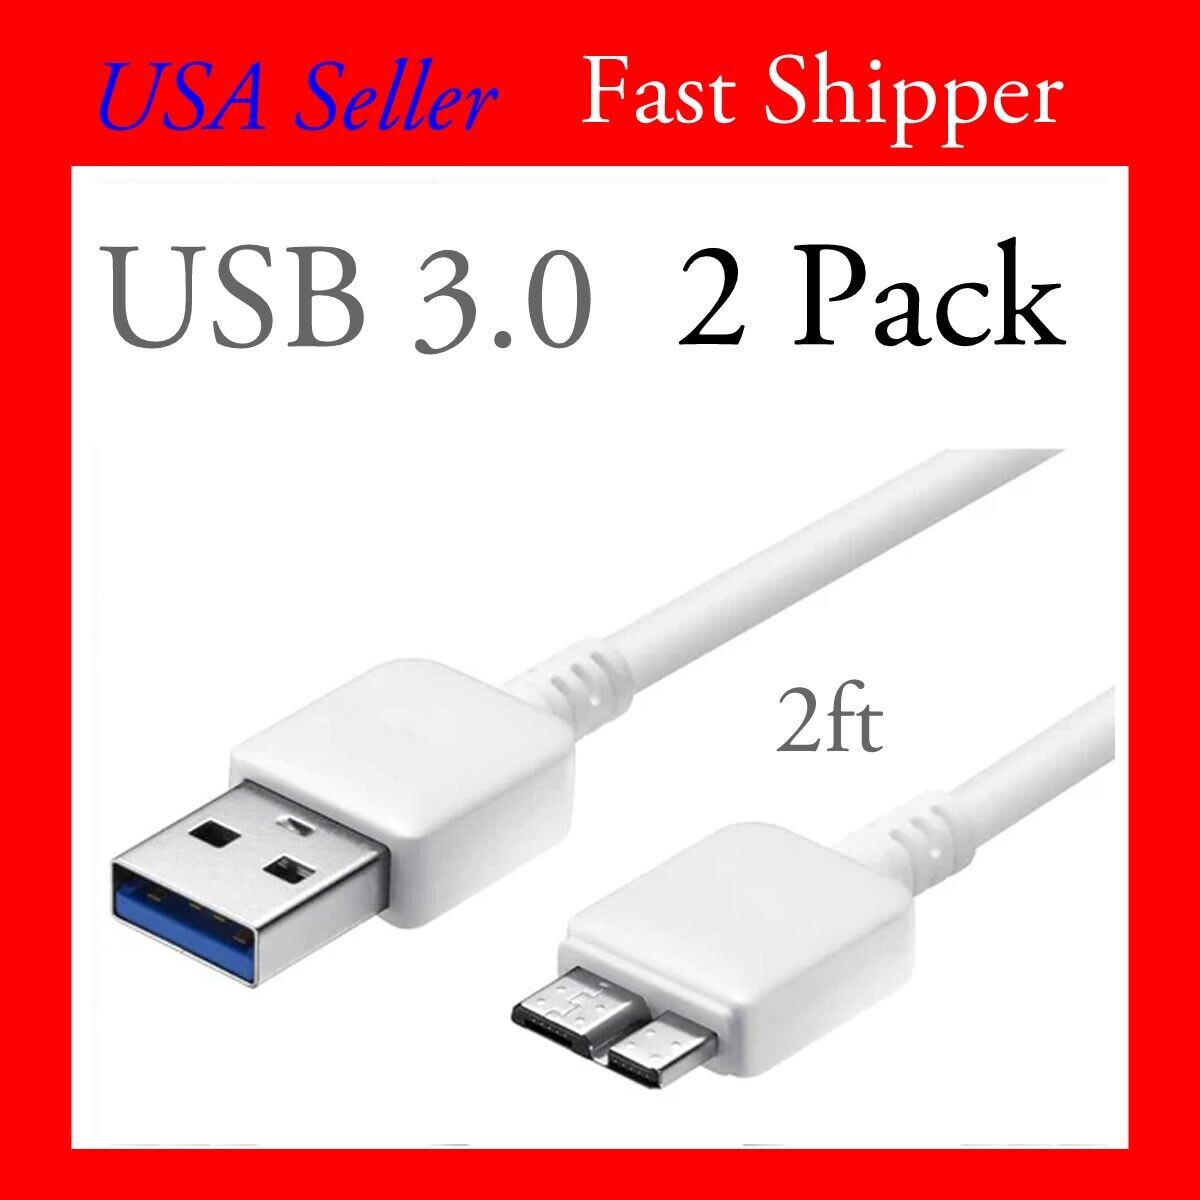 2pk - 2ft USB 3.0 CABLE CORD FOR SEAGATE BACKUP PORTABLE EXTERNAL HARD DRIVE HDD